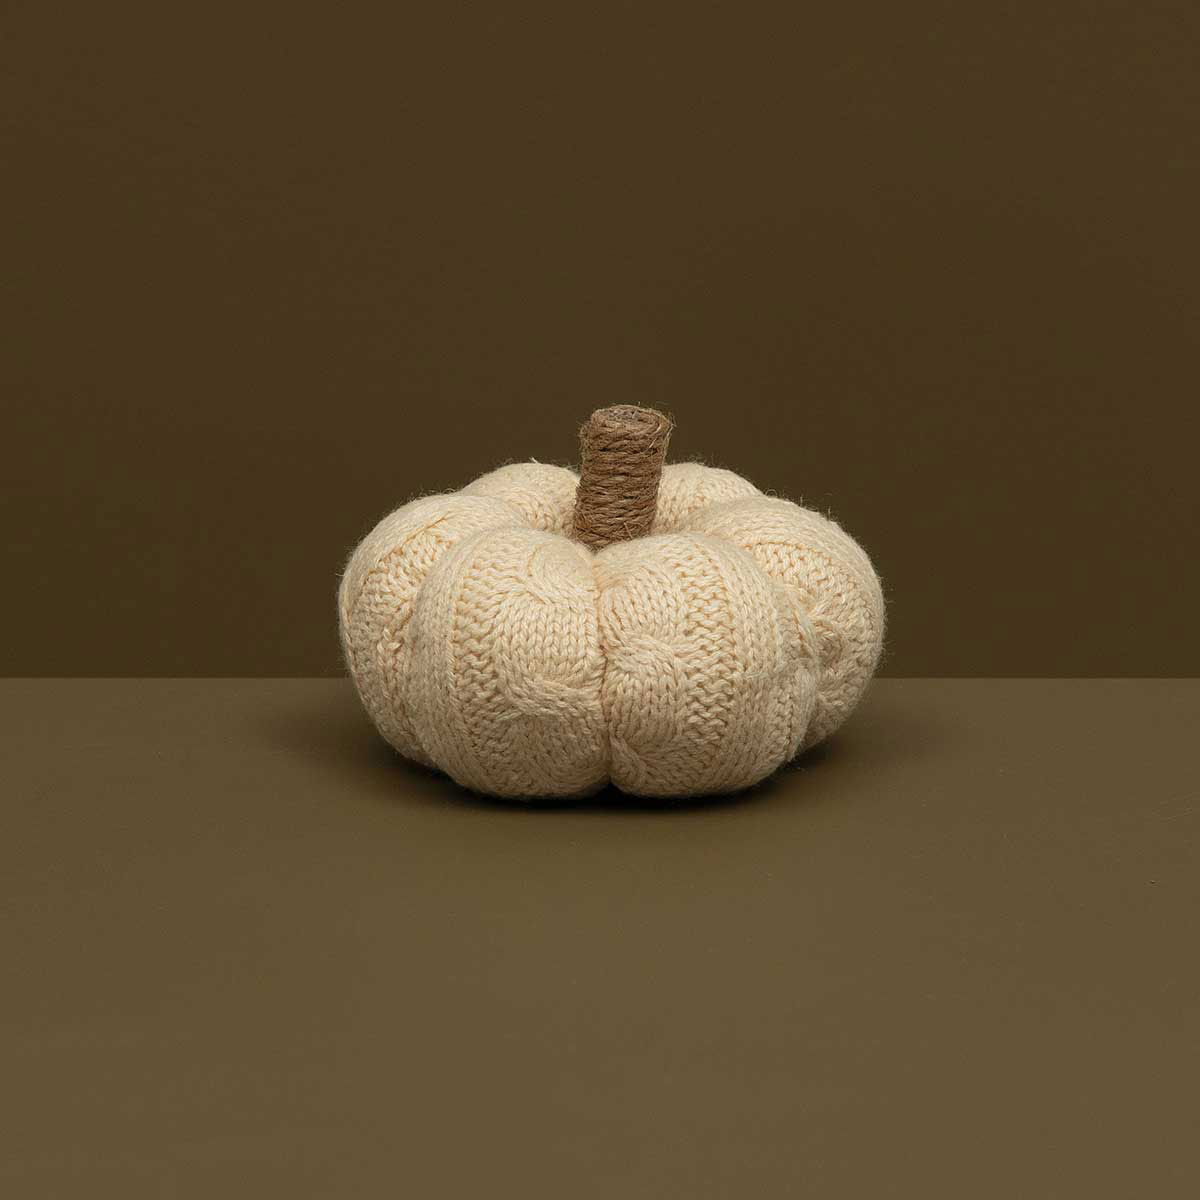 CABLE KNIT PUMPKIN PLUSH CREACHM WITH TWINE STEM SMALL 5"X3.5"